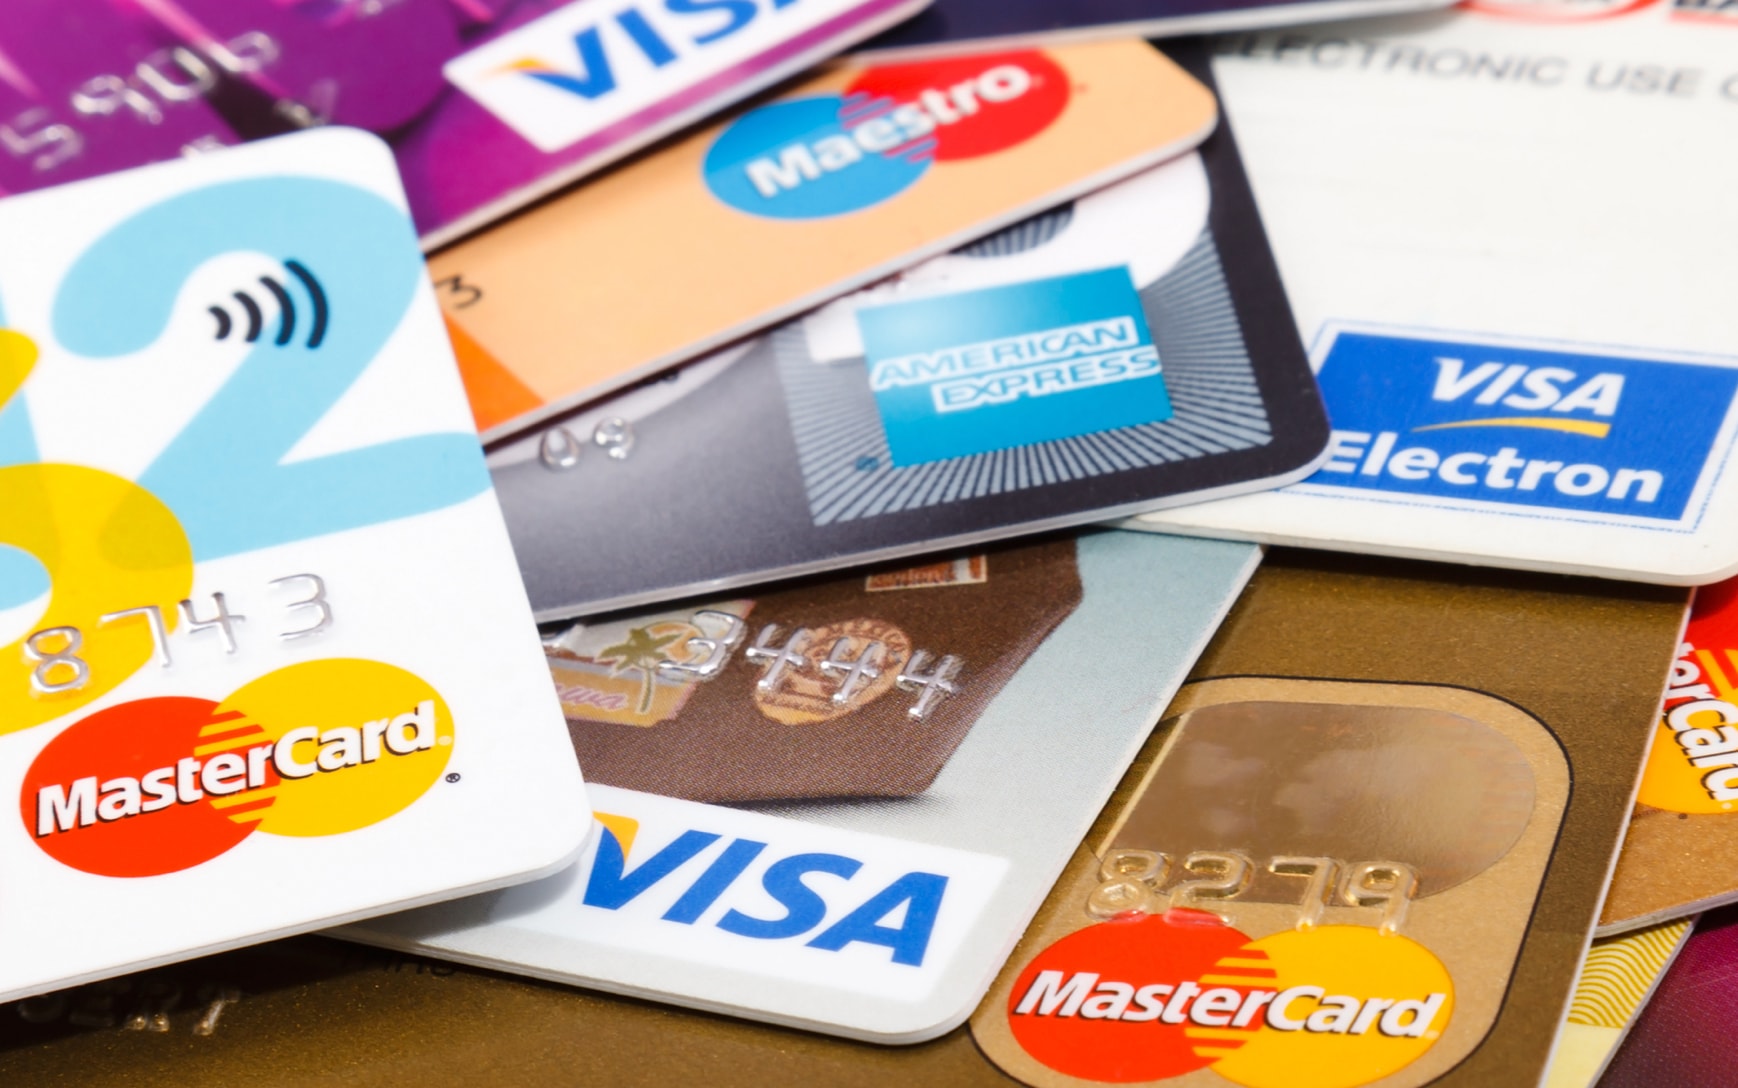 How to Save Money on Shopping with the Right Credit Card?